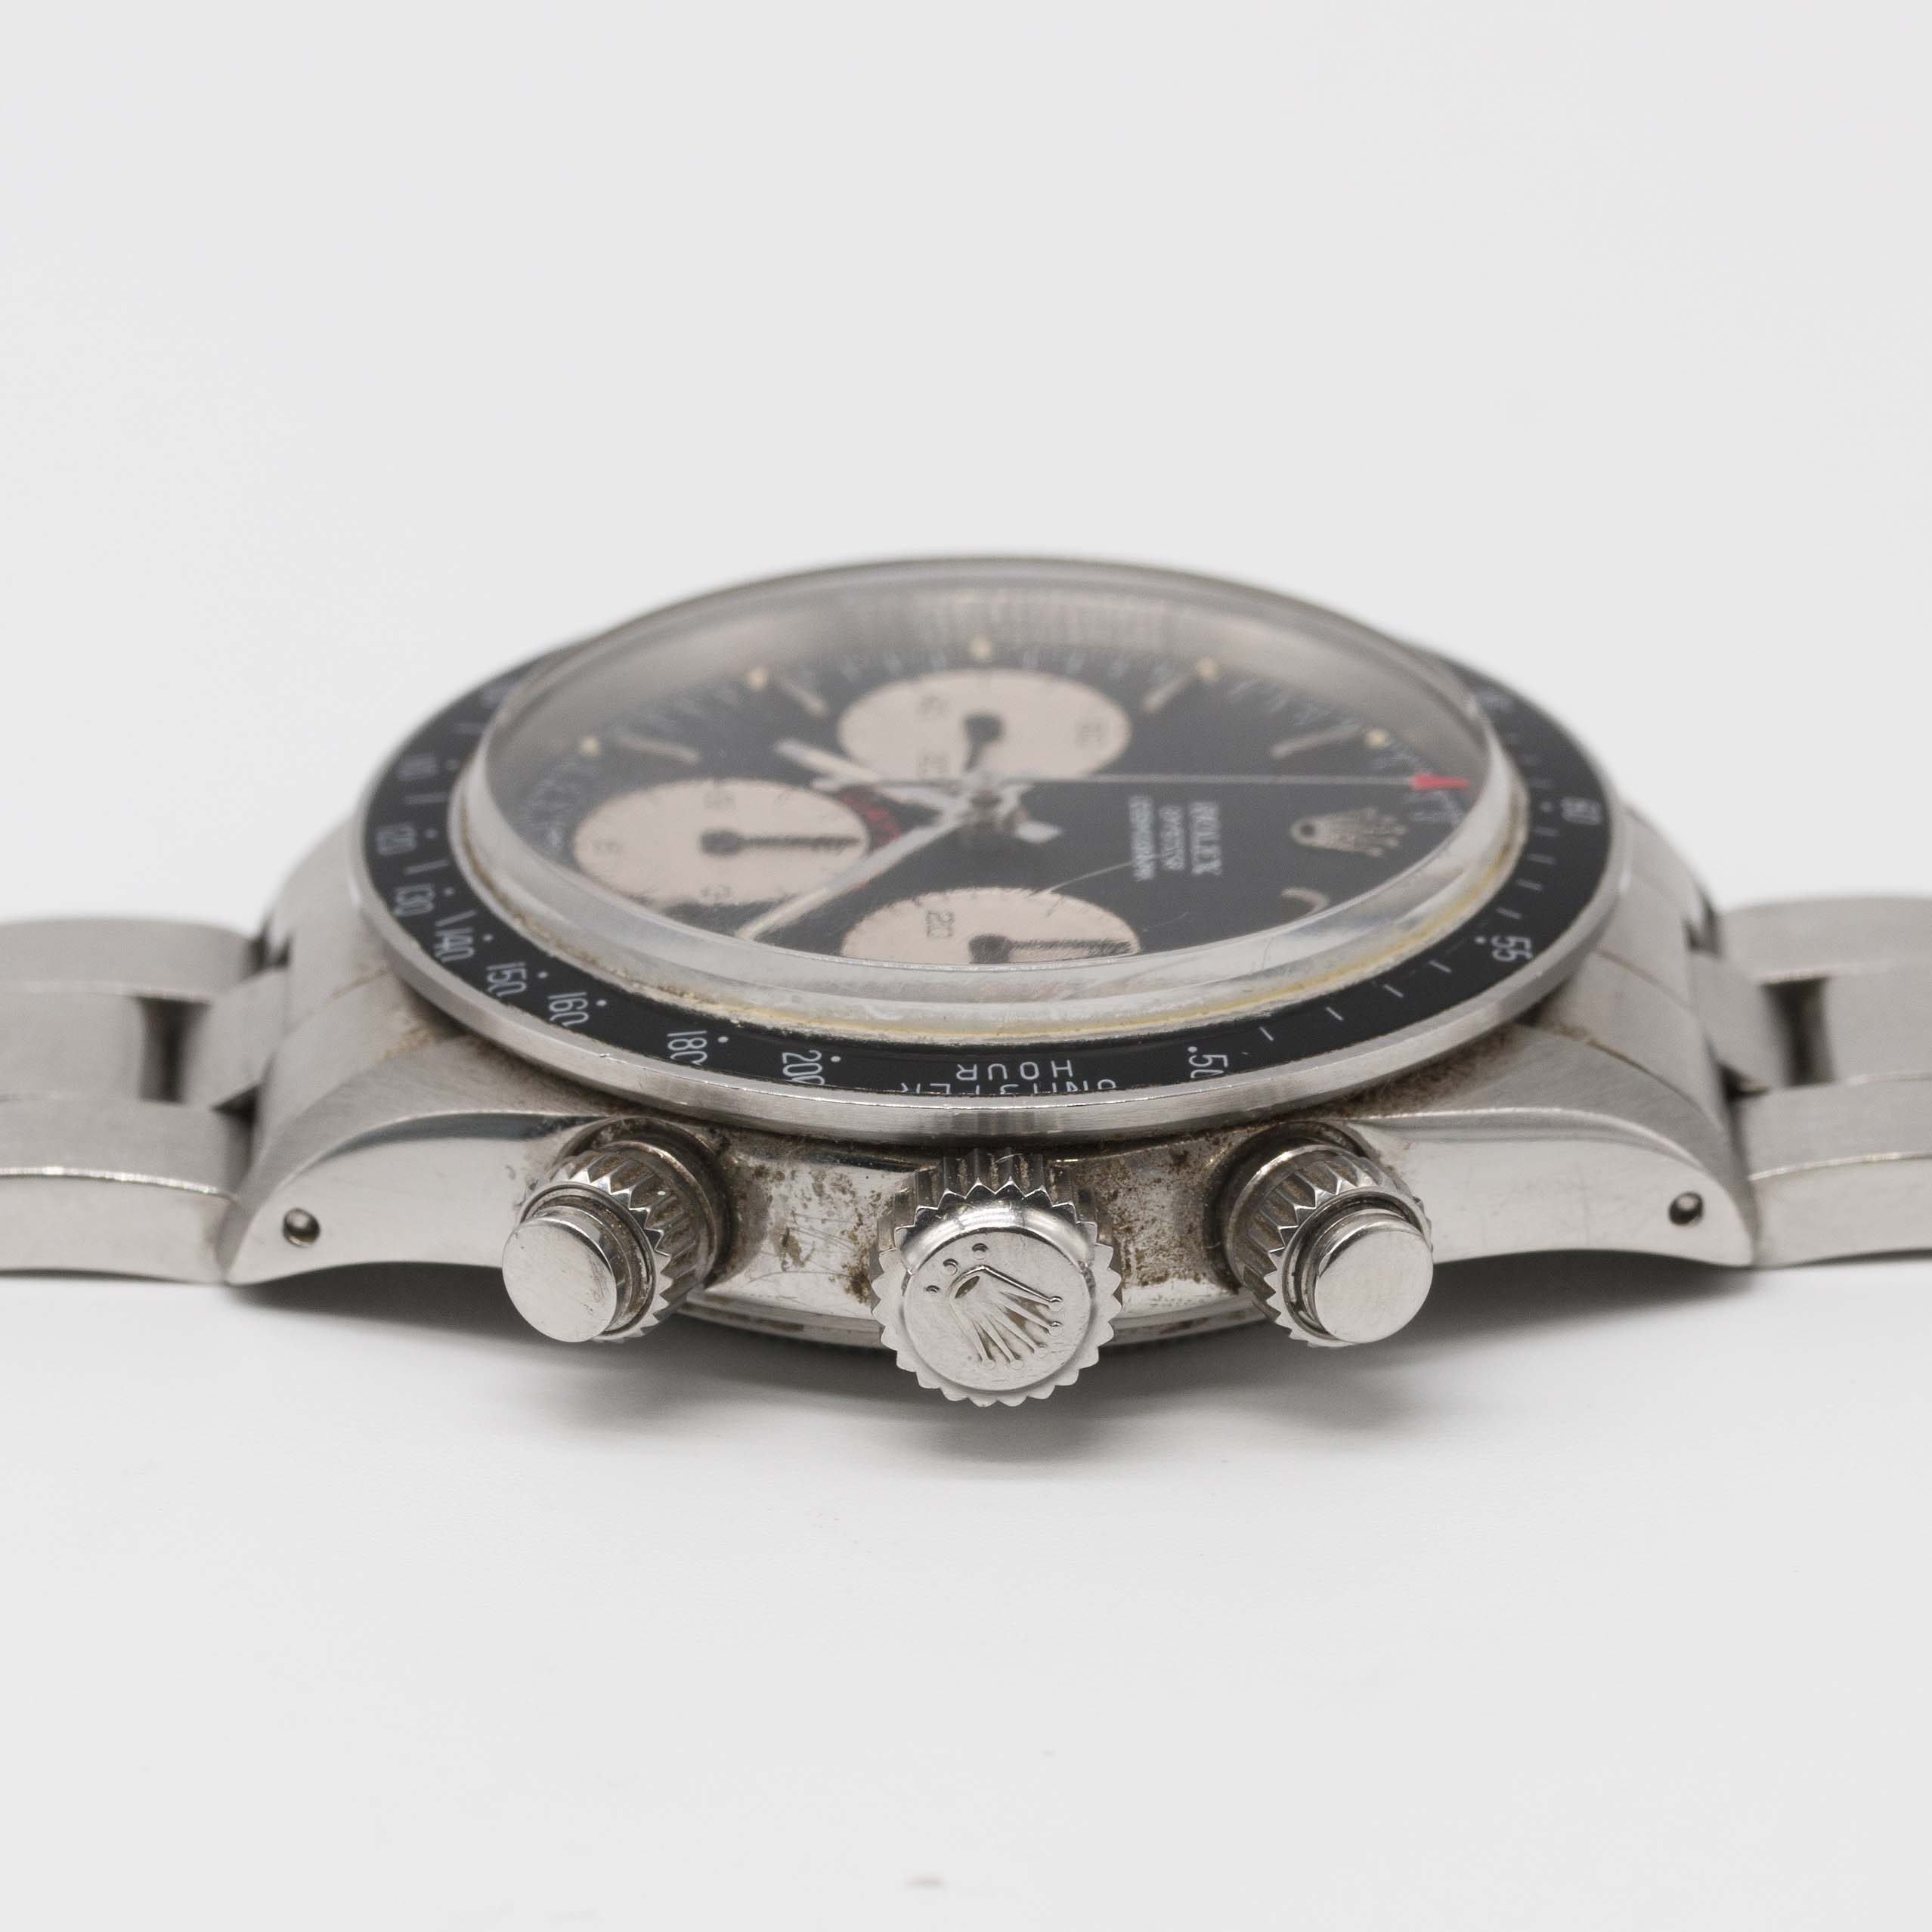 A VERY RARE GENTLEMAN'S STAINLESS STEEL ROLEX OYSTER COSMOGRAPH DAYTONA BRACELET WATCH CIRCA 1979, - Image 11 of 12